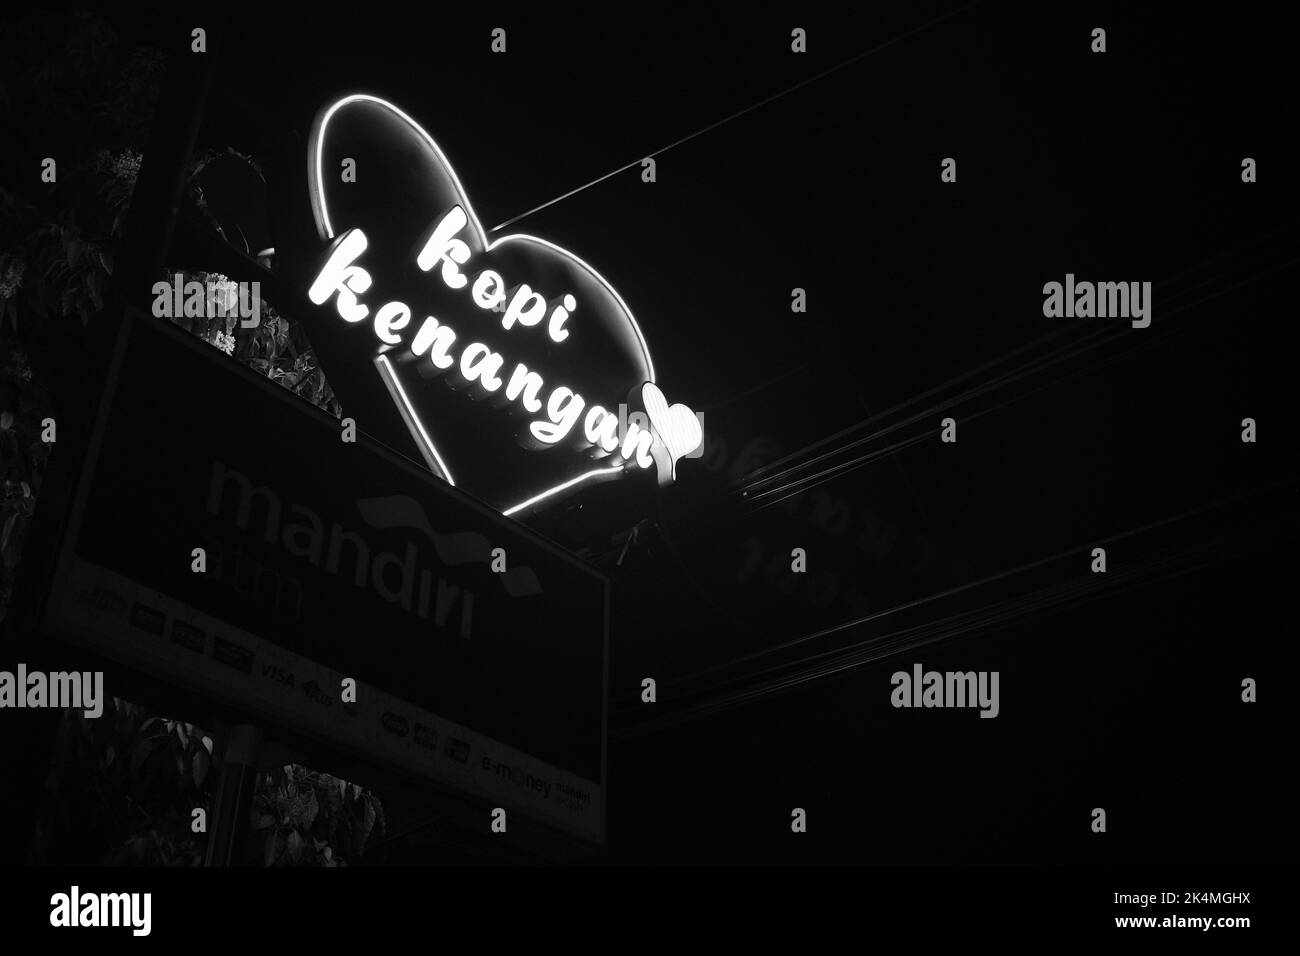 Cicalengka, West Java, Indonesia - 27 September, 2022 : Monochrome photo of neon lights from the drink brand sign 'Kopi Kenangan' Stock Photo